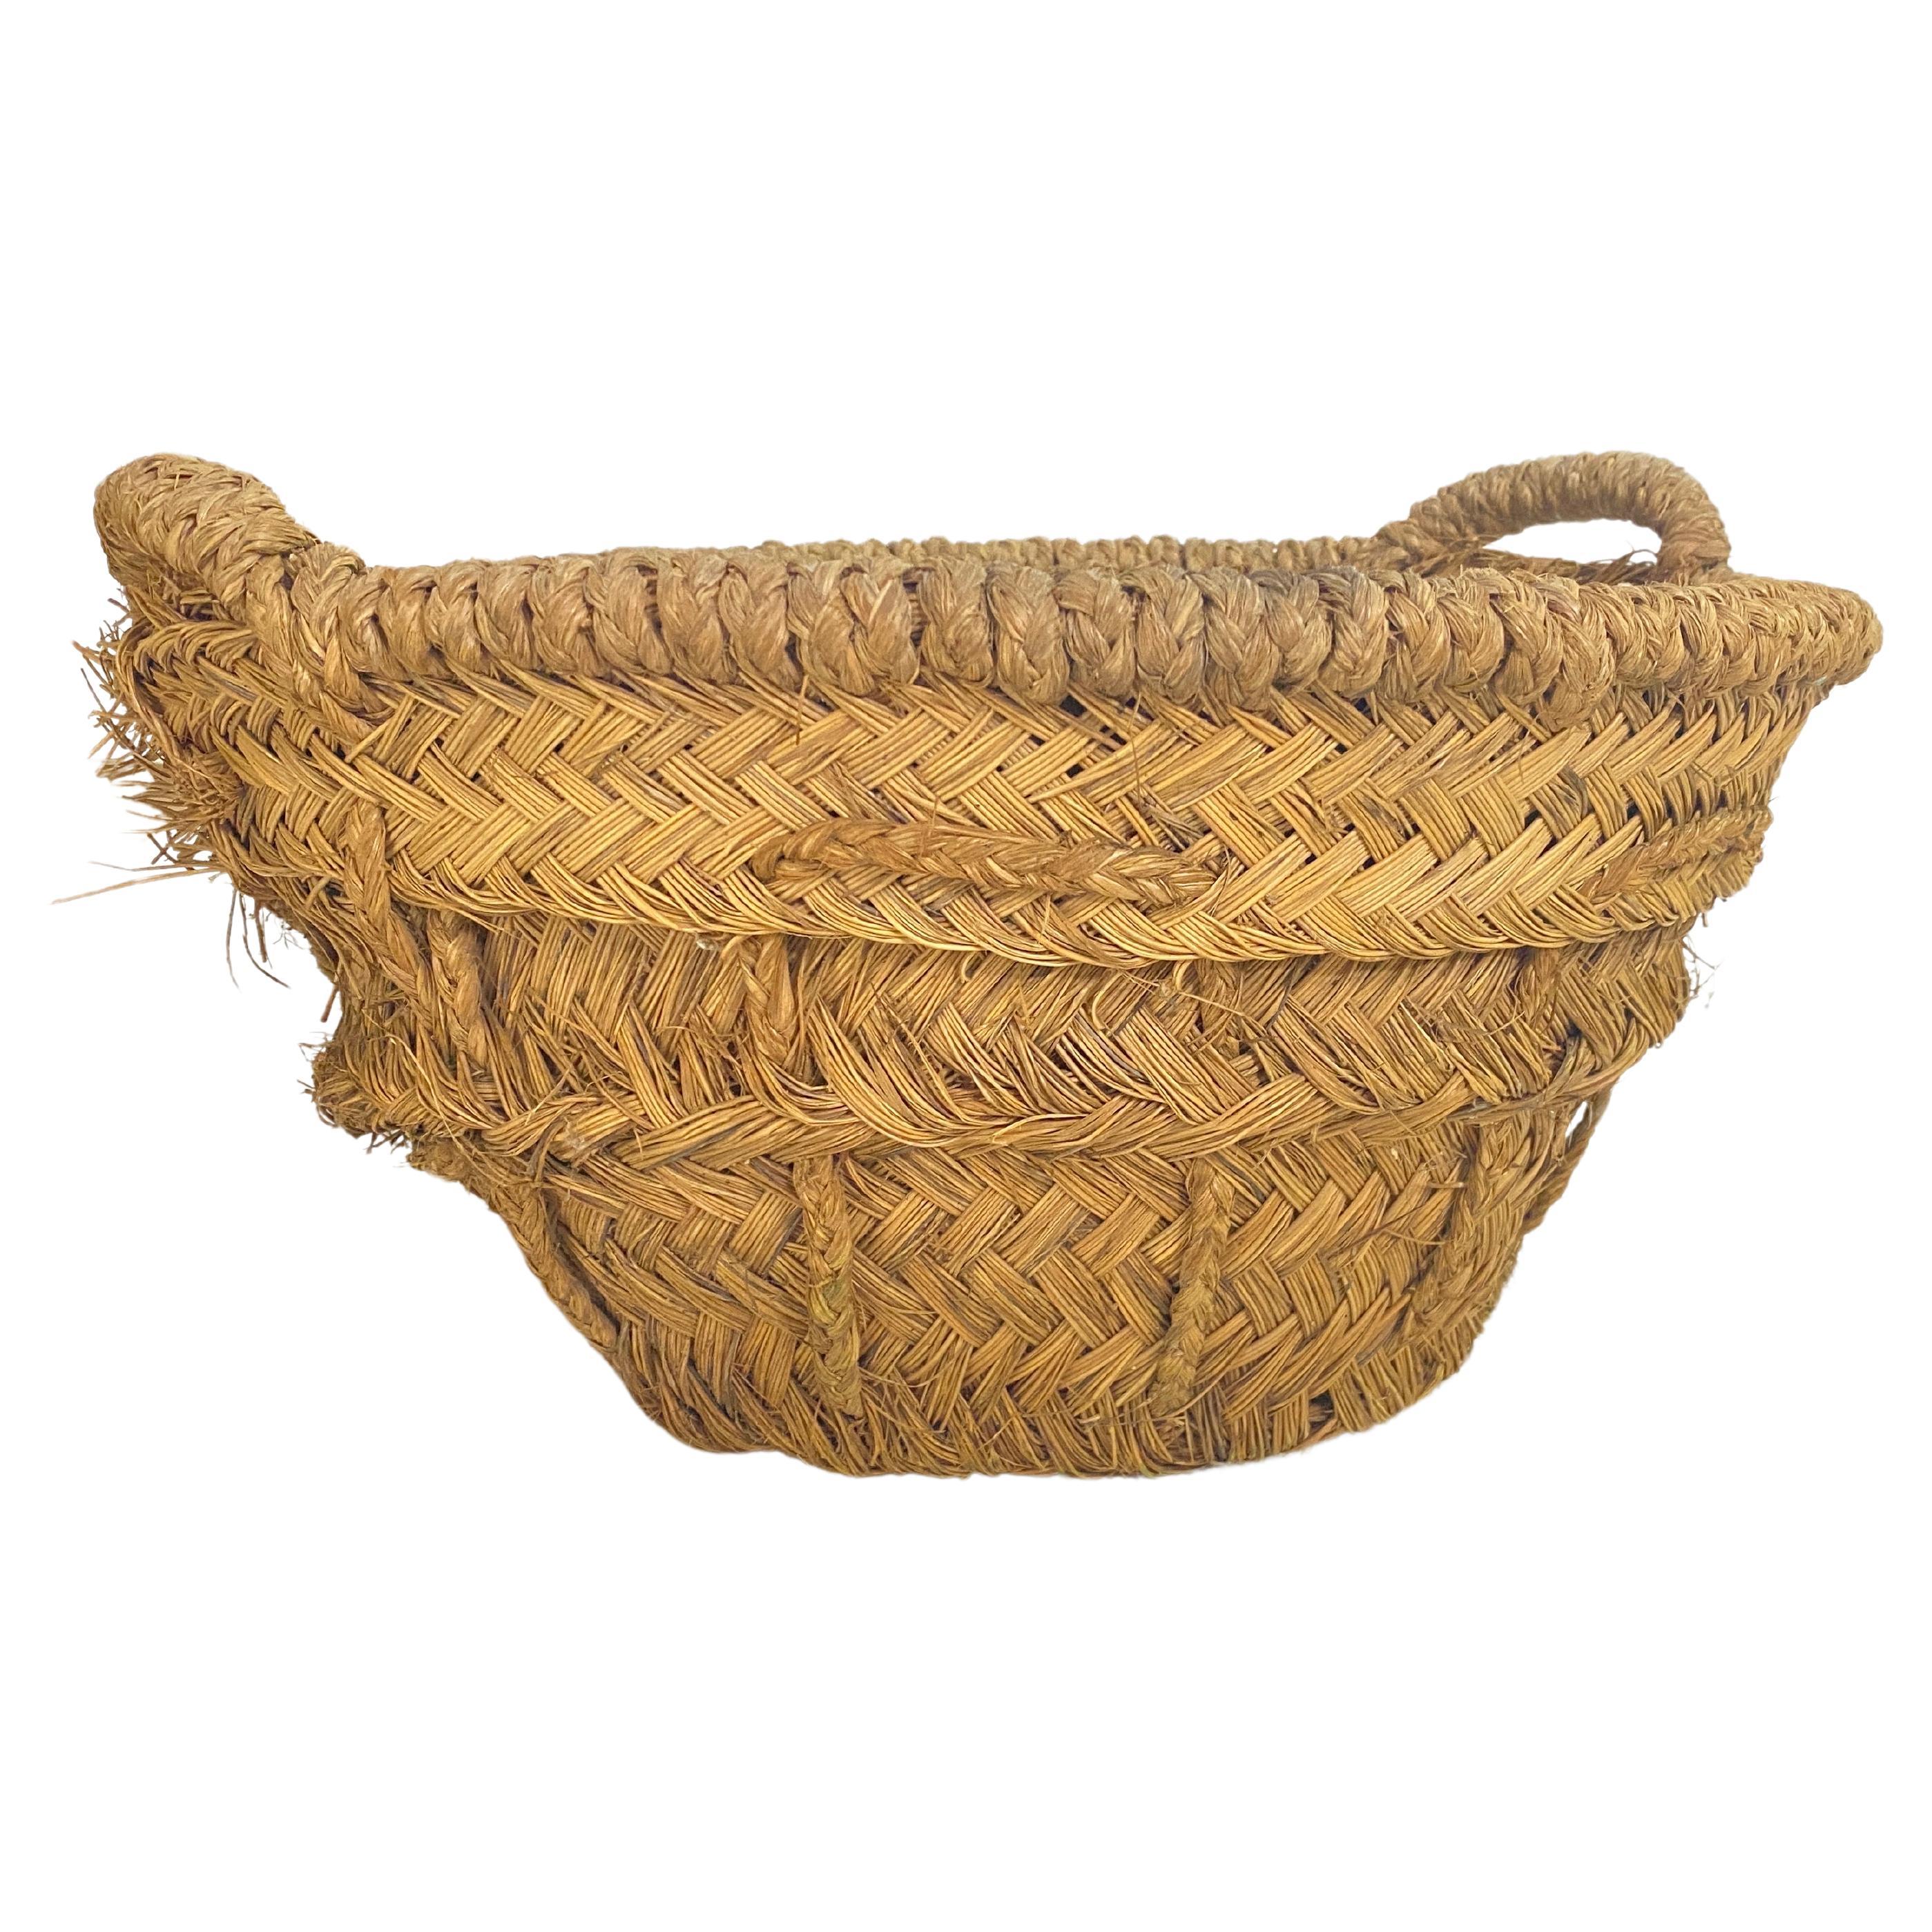 This basket is in rattan, it has been made in Italy in the 1970's.